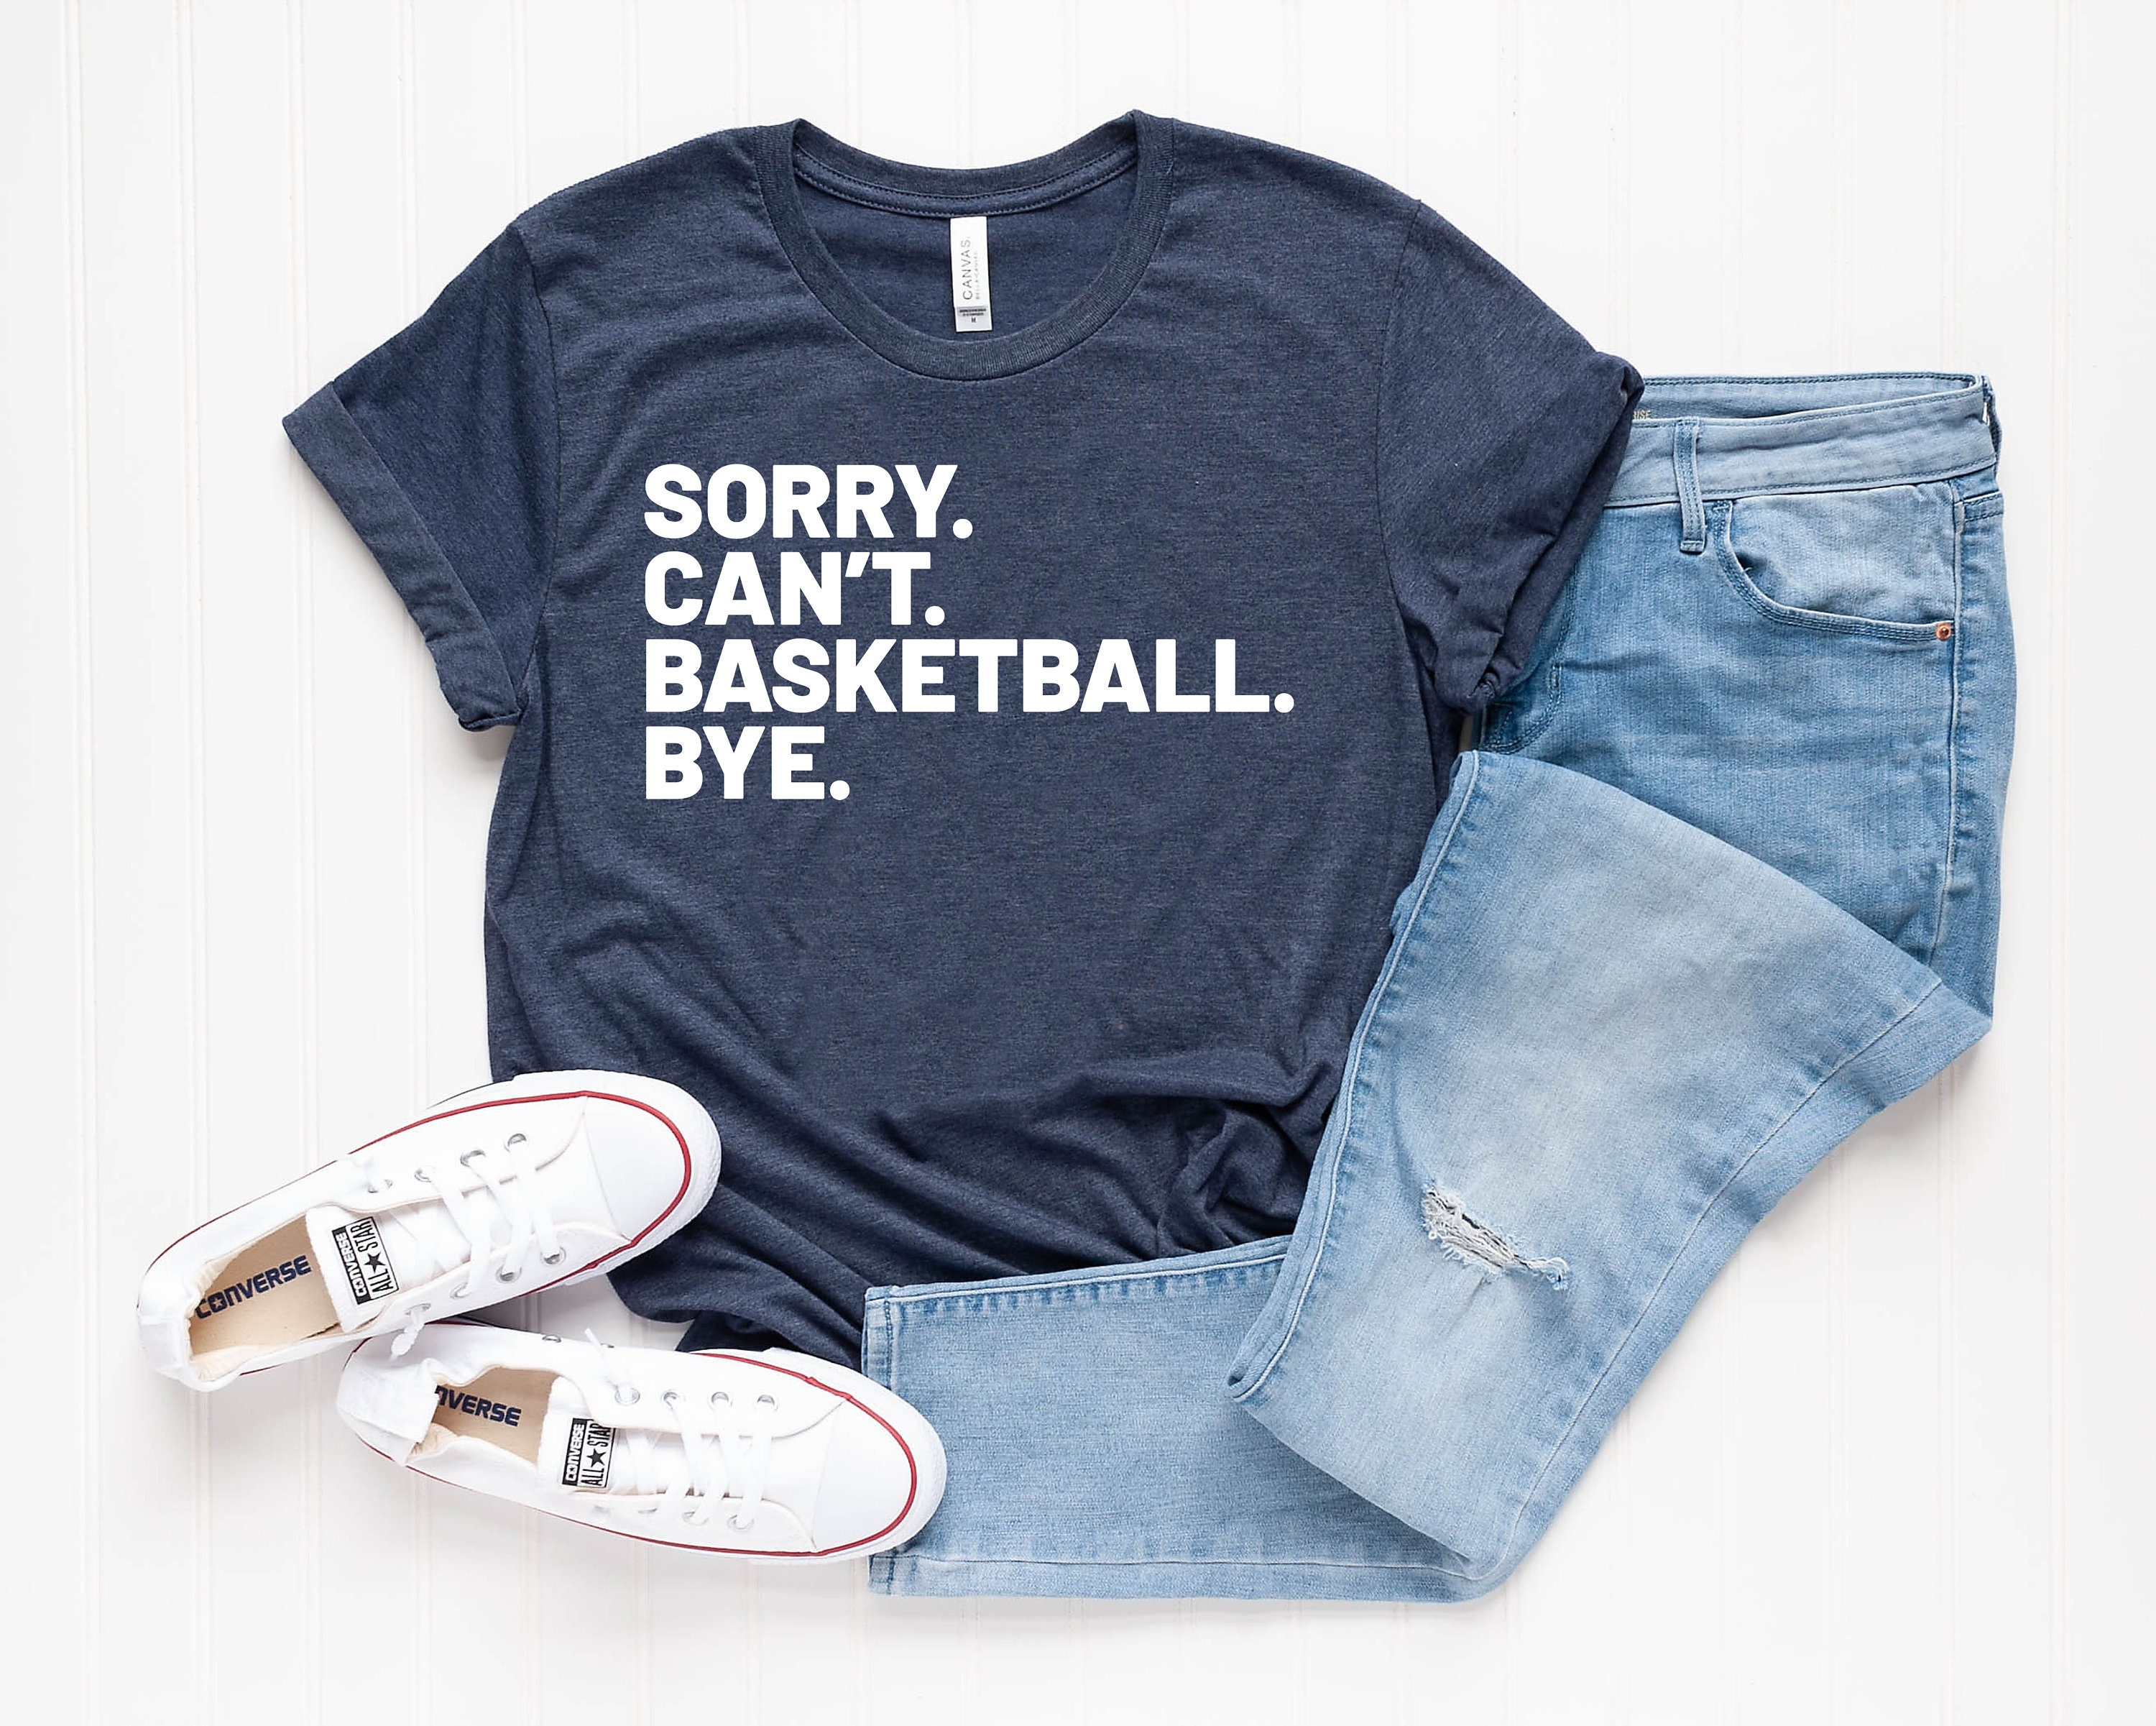 14. "Sorry. Can't. Basketball. Bye." T-Shirt